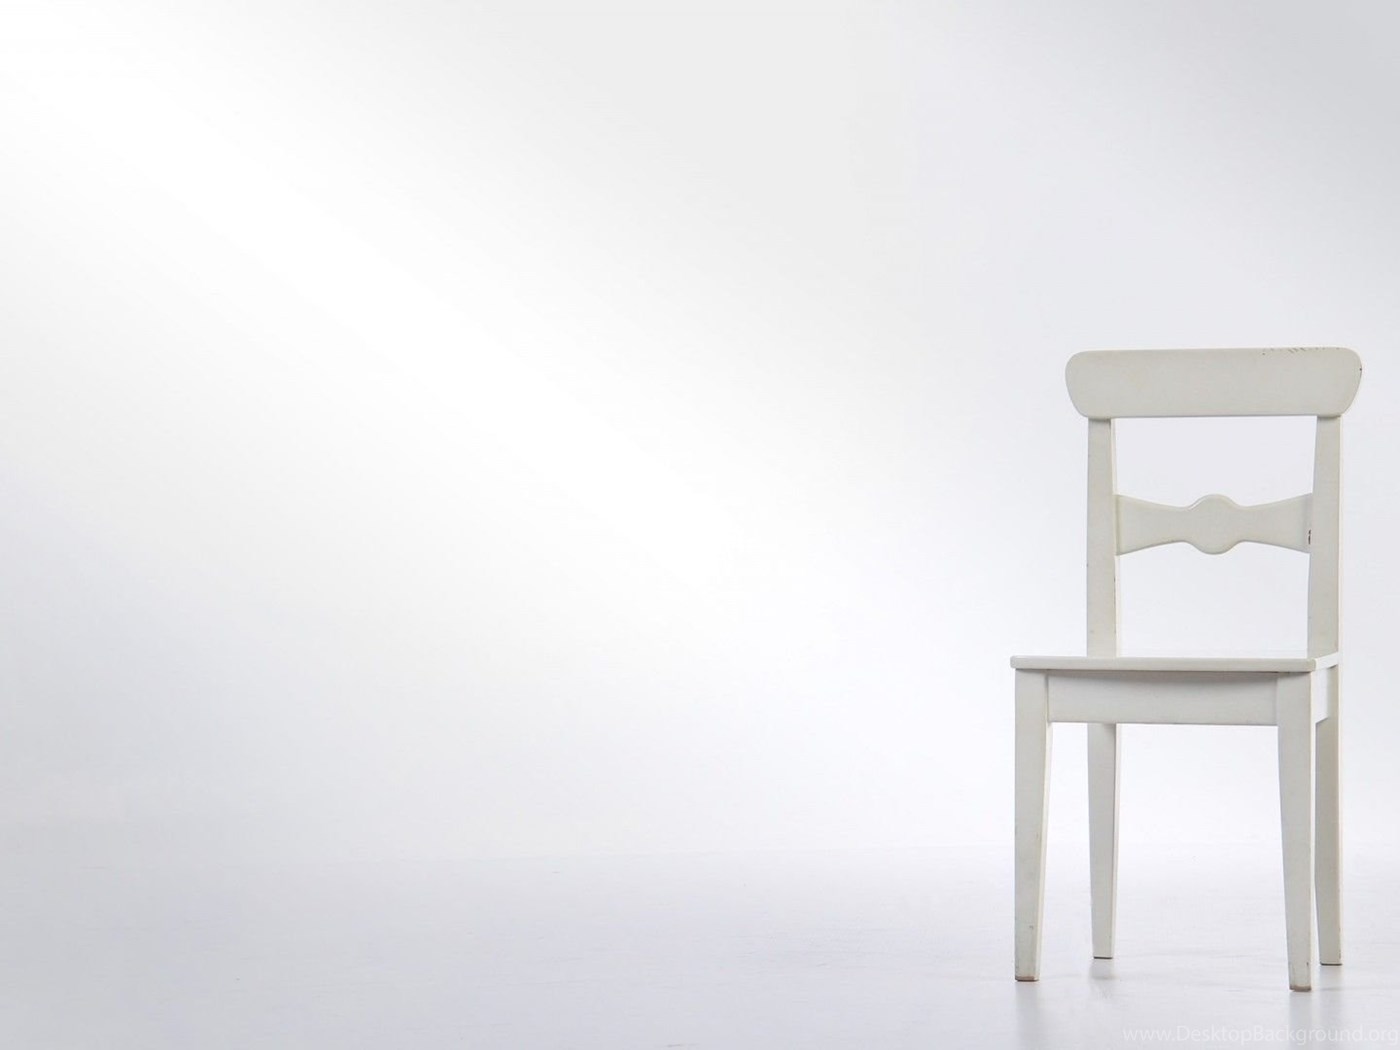 A White Chair In A White Room Hd Wallpapers Mixhd Wallpapers Desktop Background